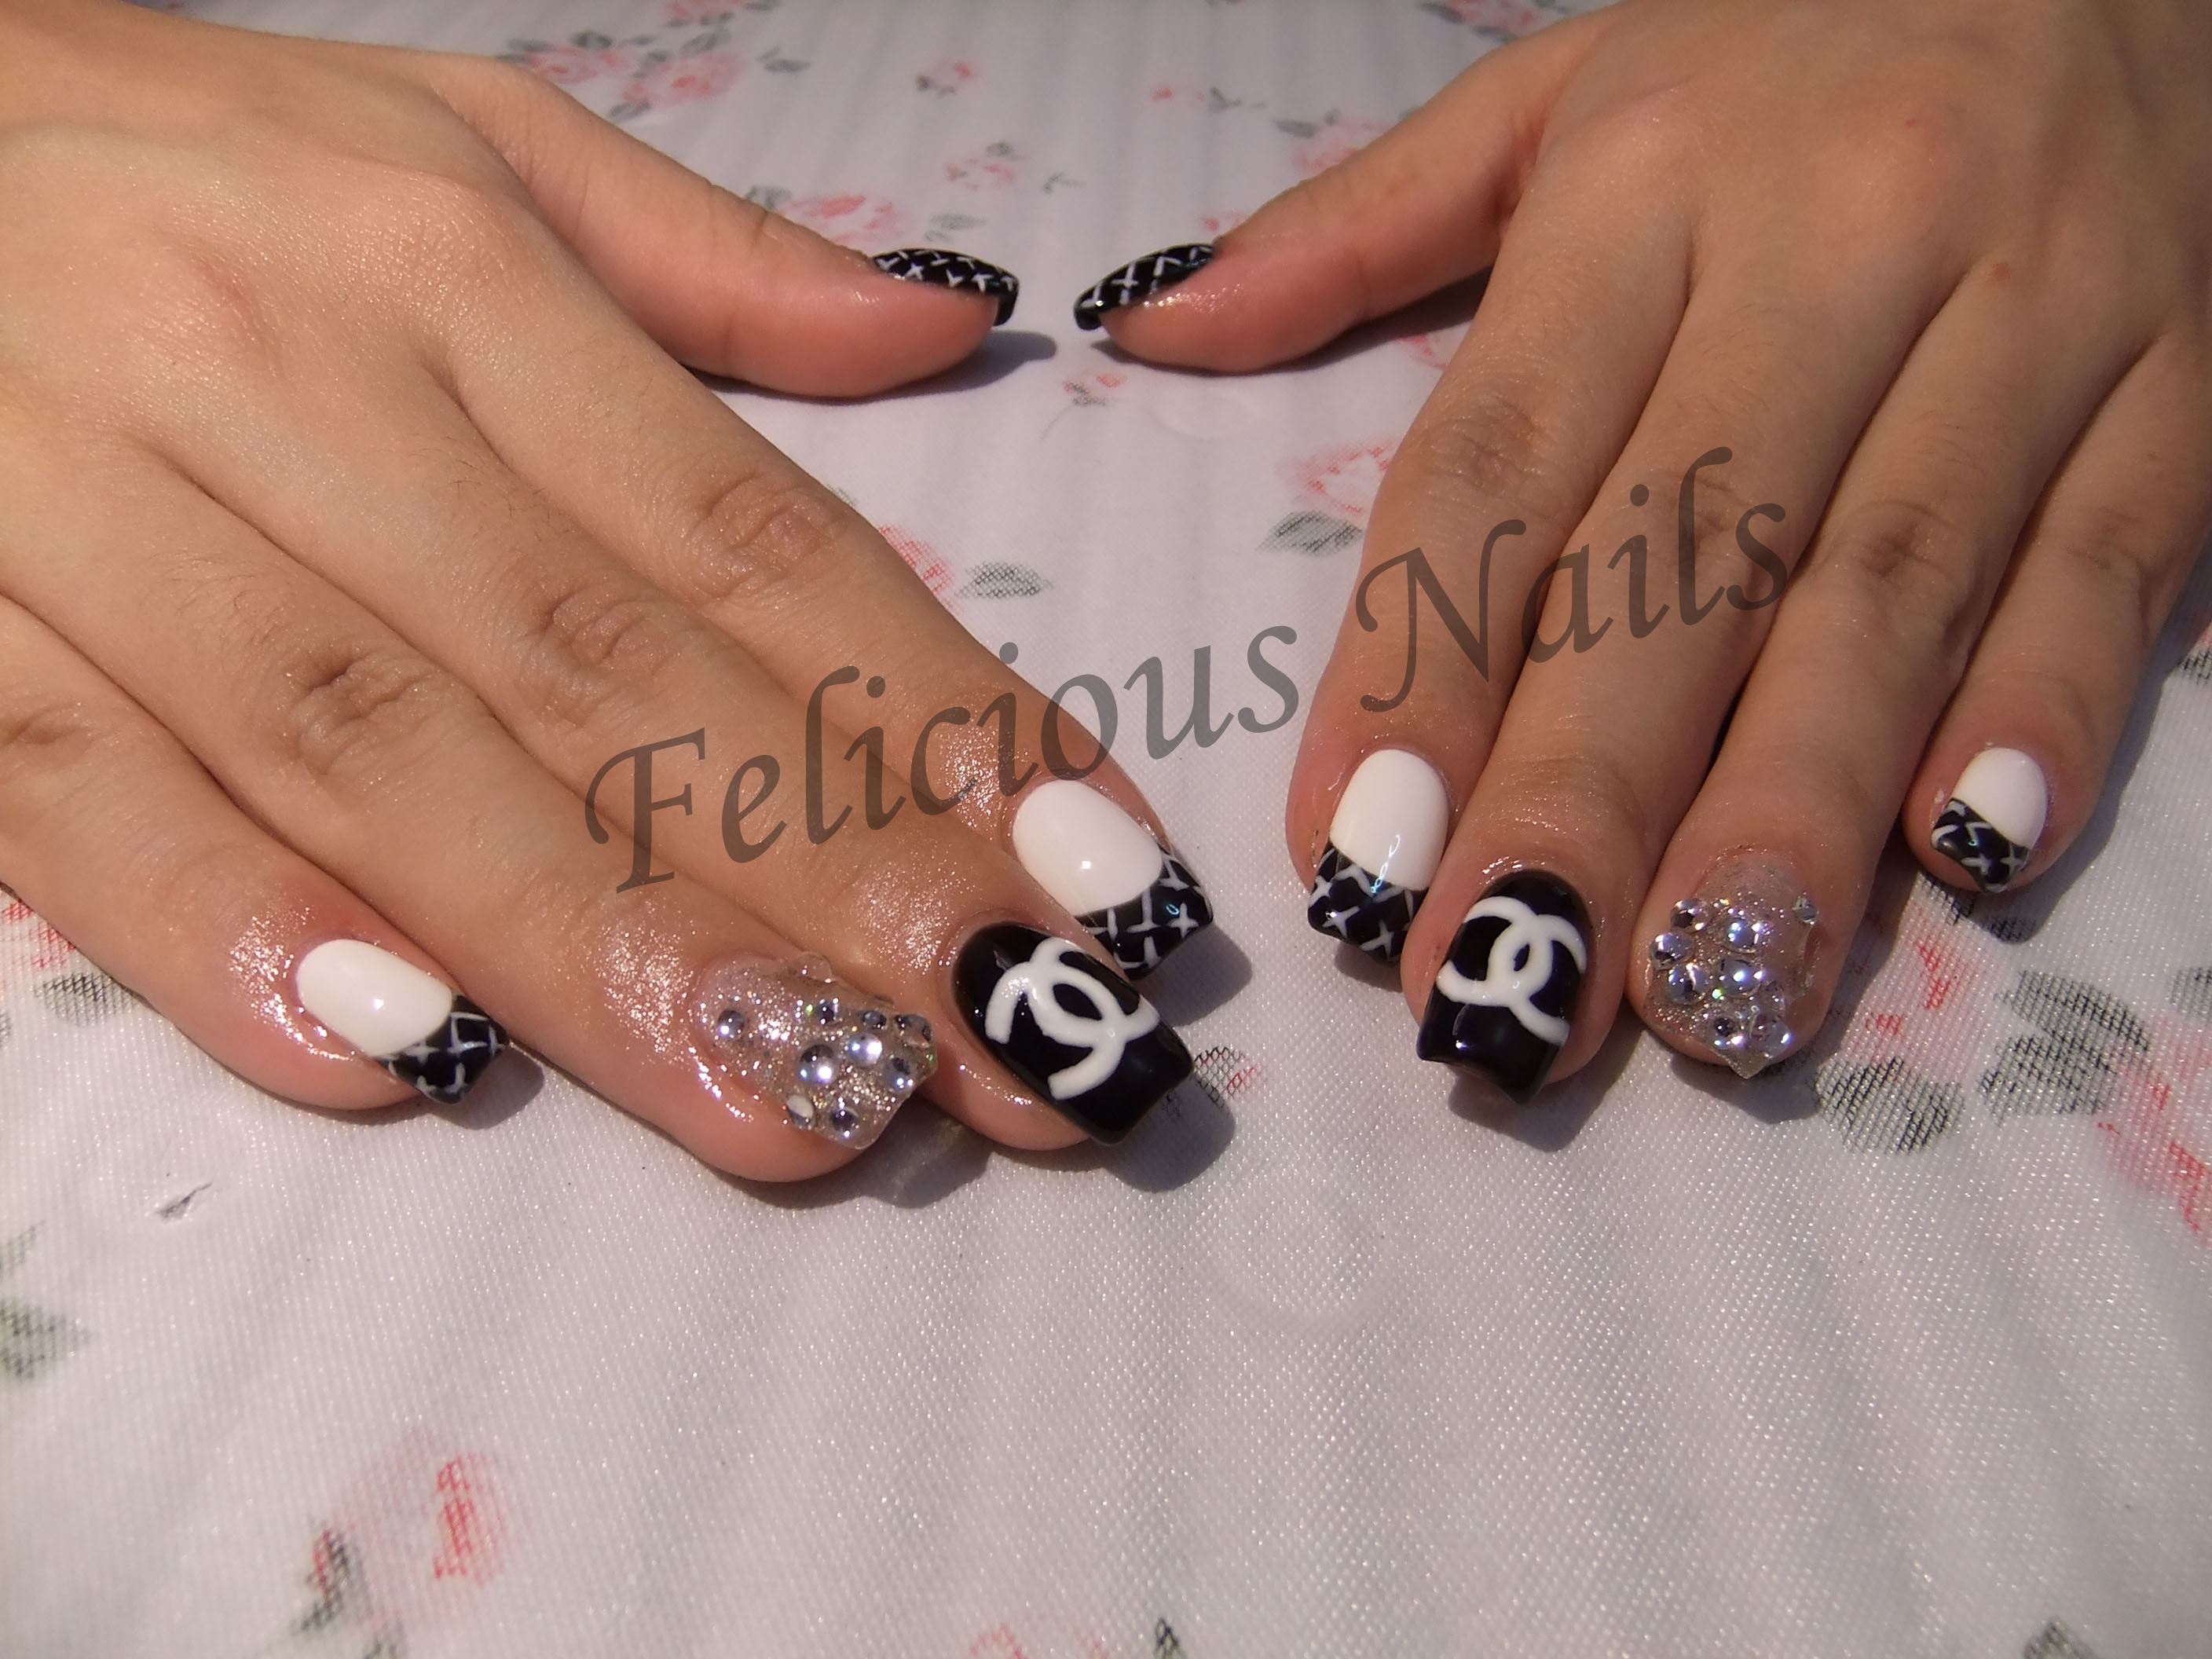 4th set of Chanel nails!